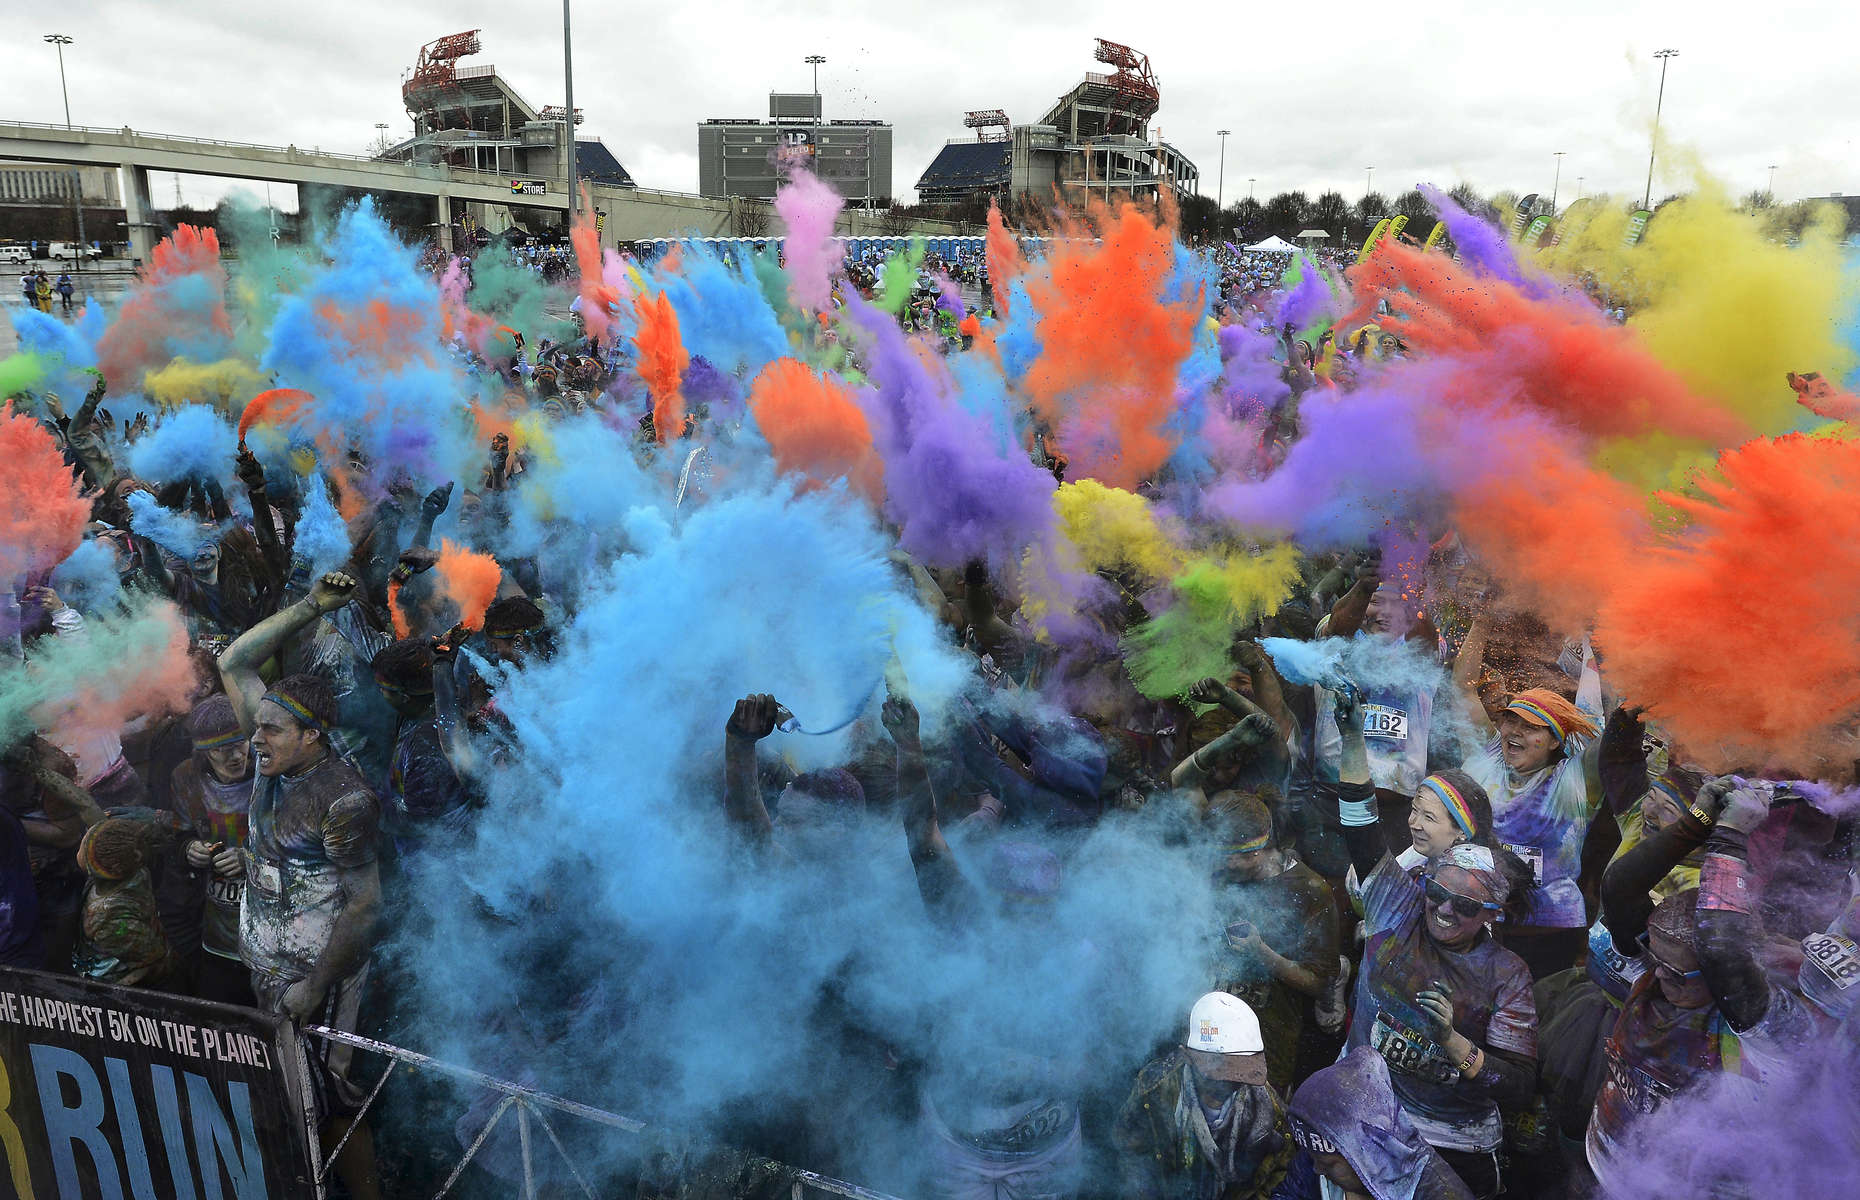 Runners celebrate in the parking lot of LP Field at the end of the Color Run in Nashville, Tenn. (Mark Zaleski/ For The Tennessean)